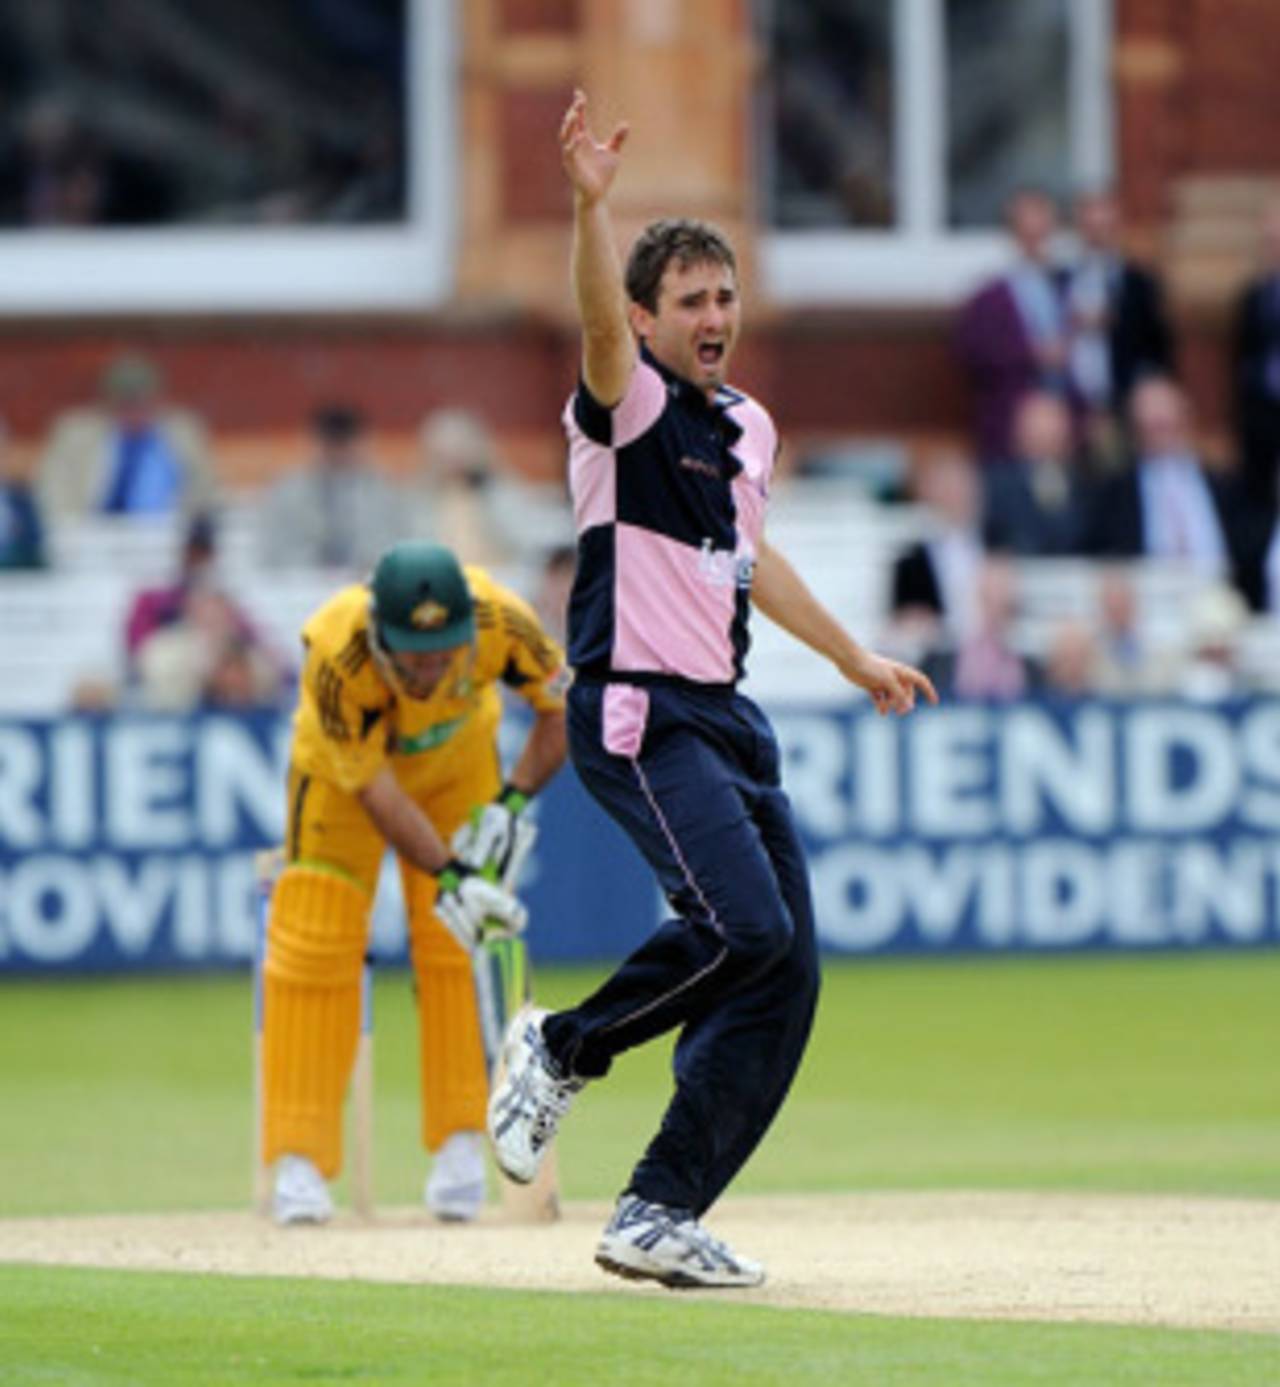 Tim Murtagh appeals successfully for the crucial wicket of Ricky Ponting as Middlesex took control, Middlesex v Australians, Tour Match, Lord's, June 19, 2010